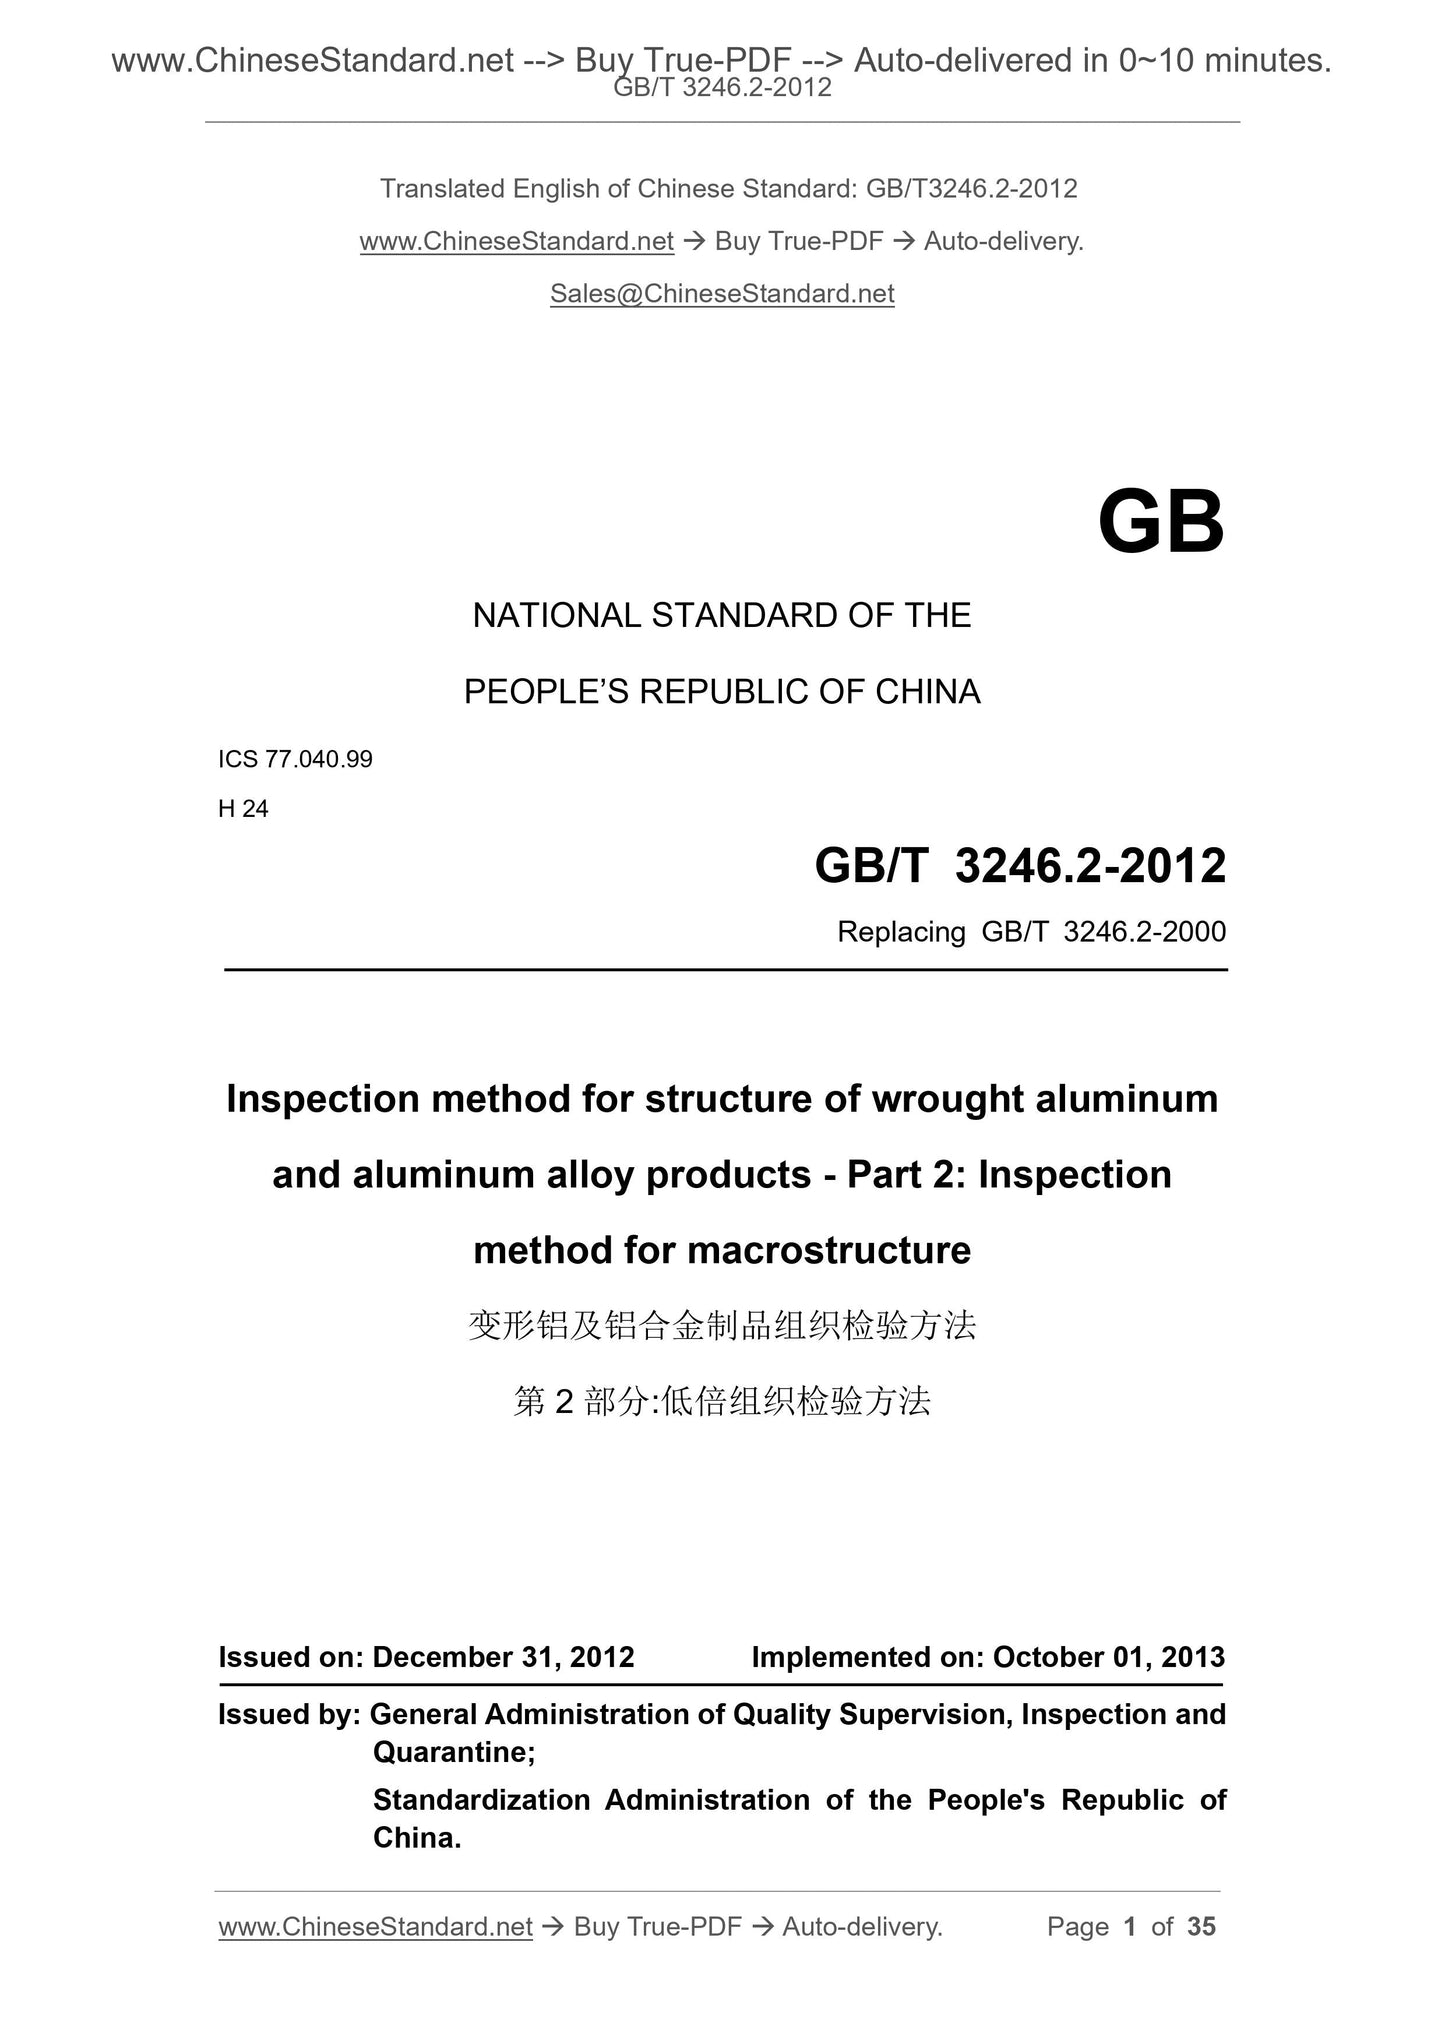 GB/T 3246.2-2012 Page 1